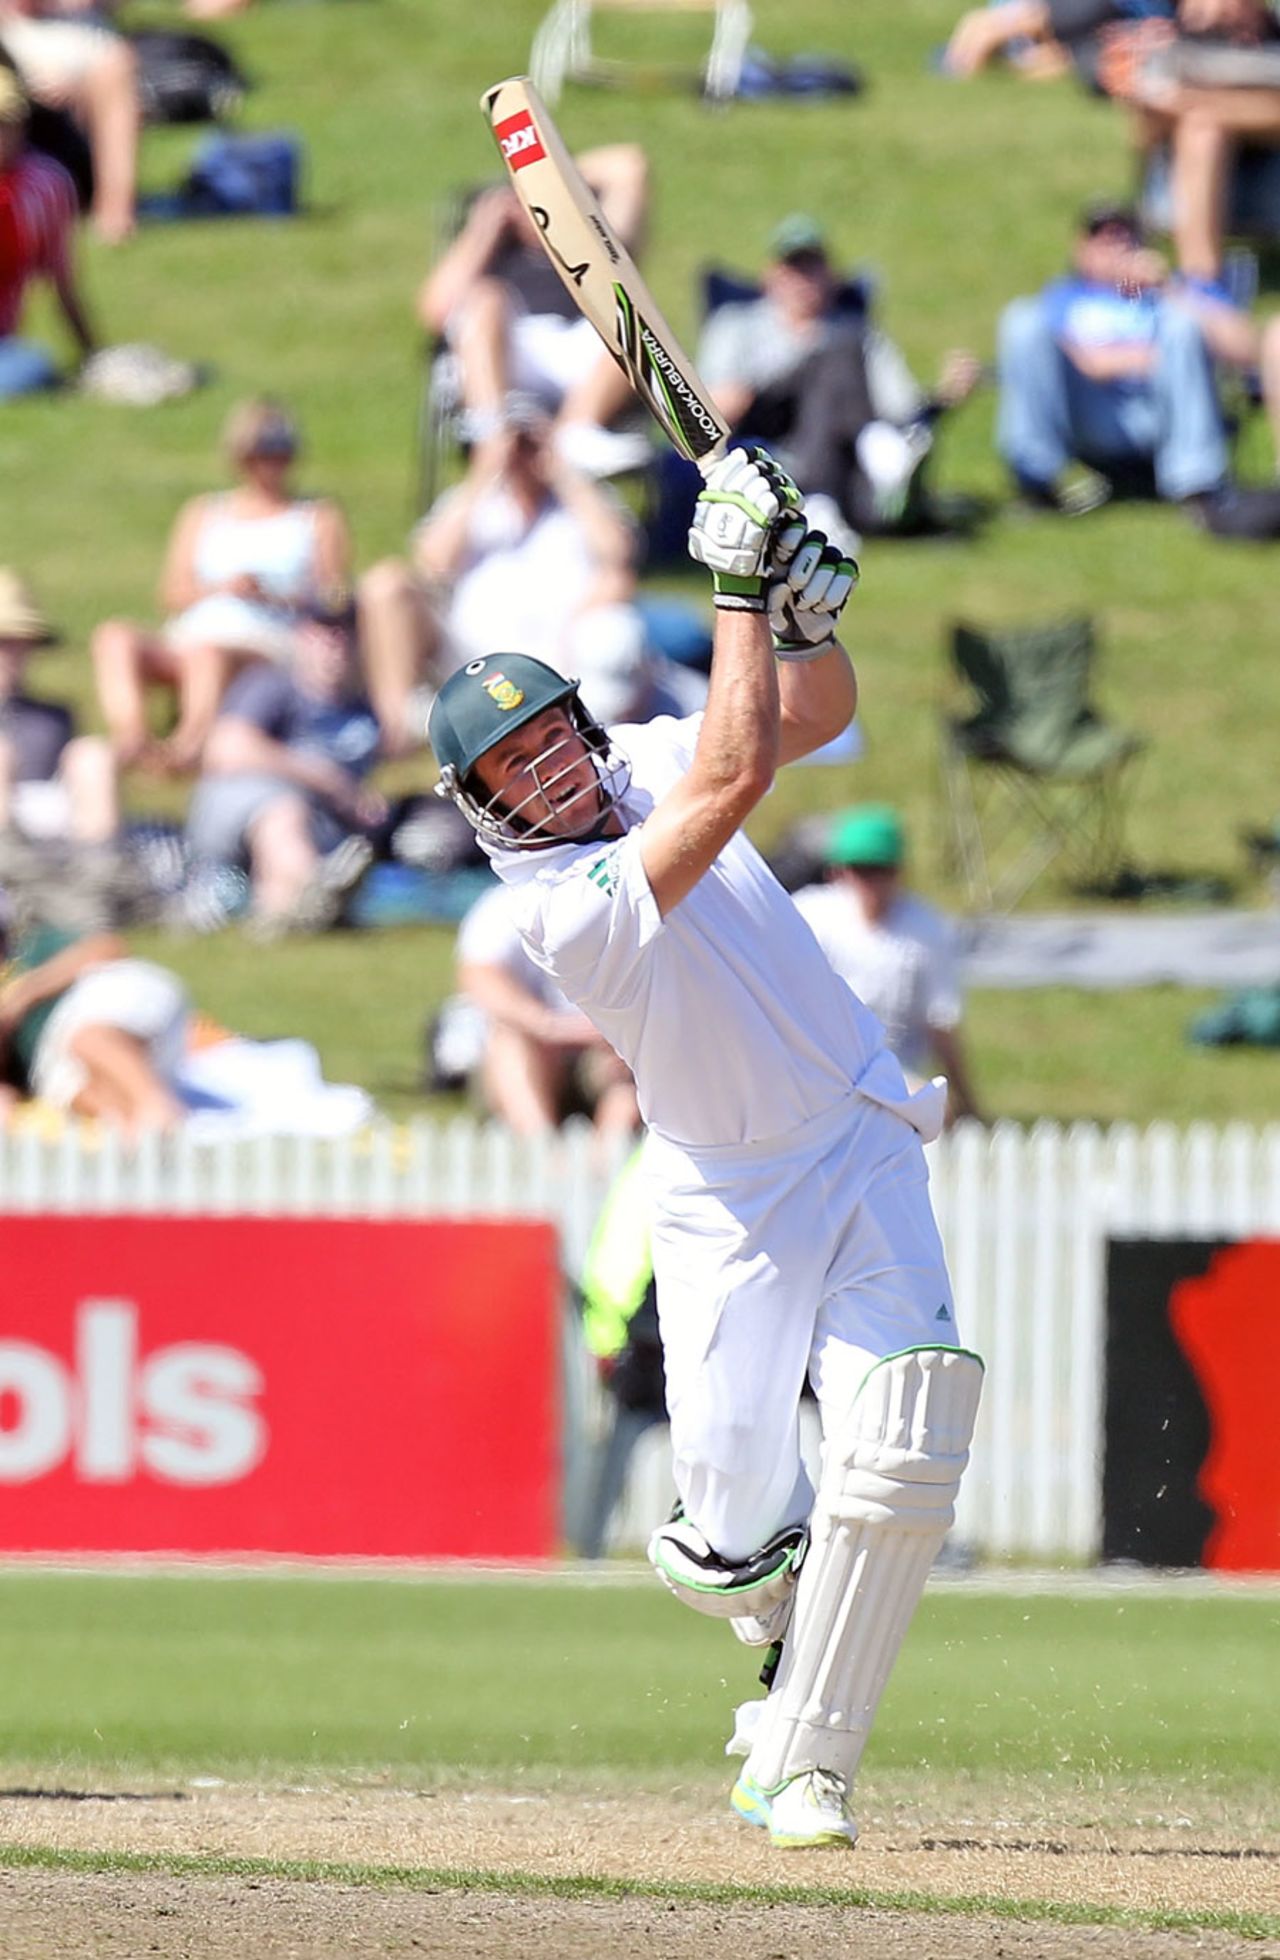 AB de Villiers scored a solid 83, New Zealand v South Africa, 2nd Test, Hamilton, 2nd day, March 16, 2012